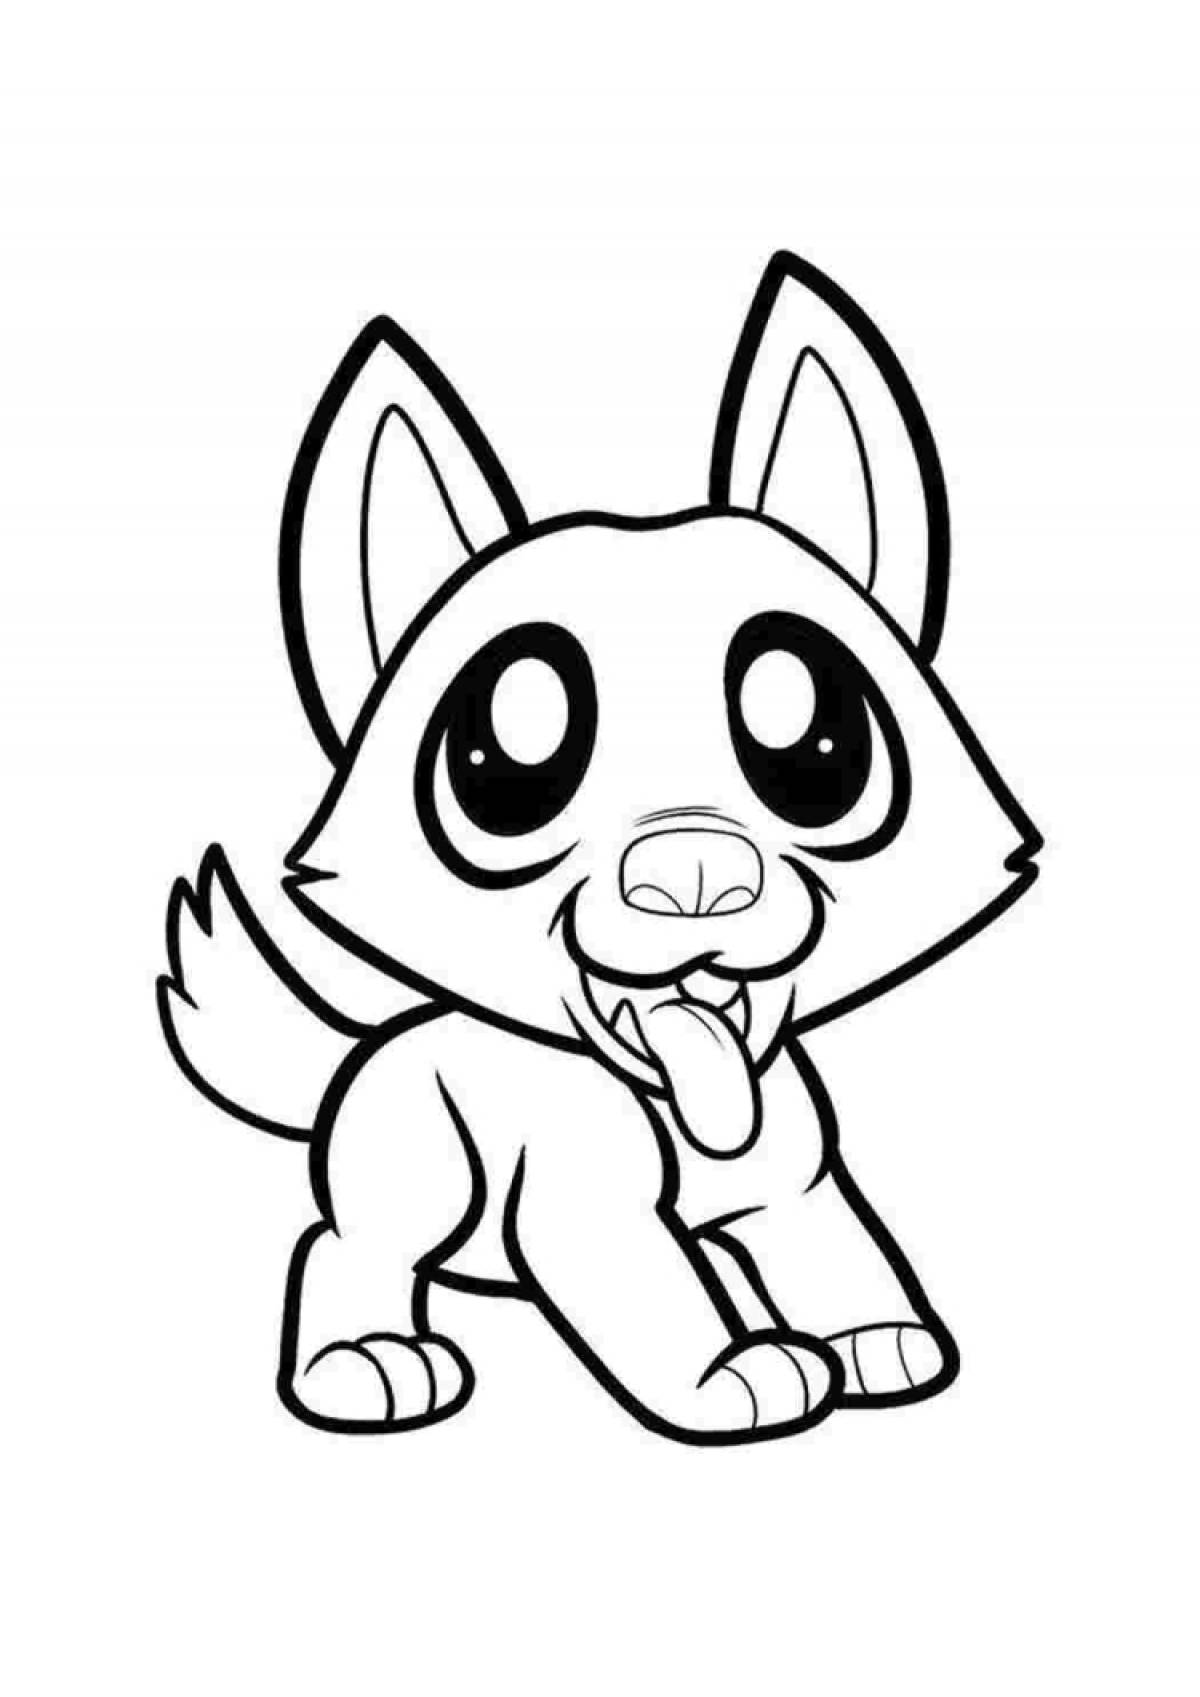 Coloring page friendly cute dog